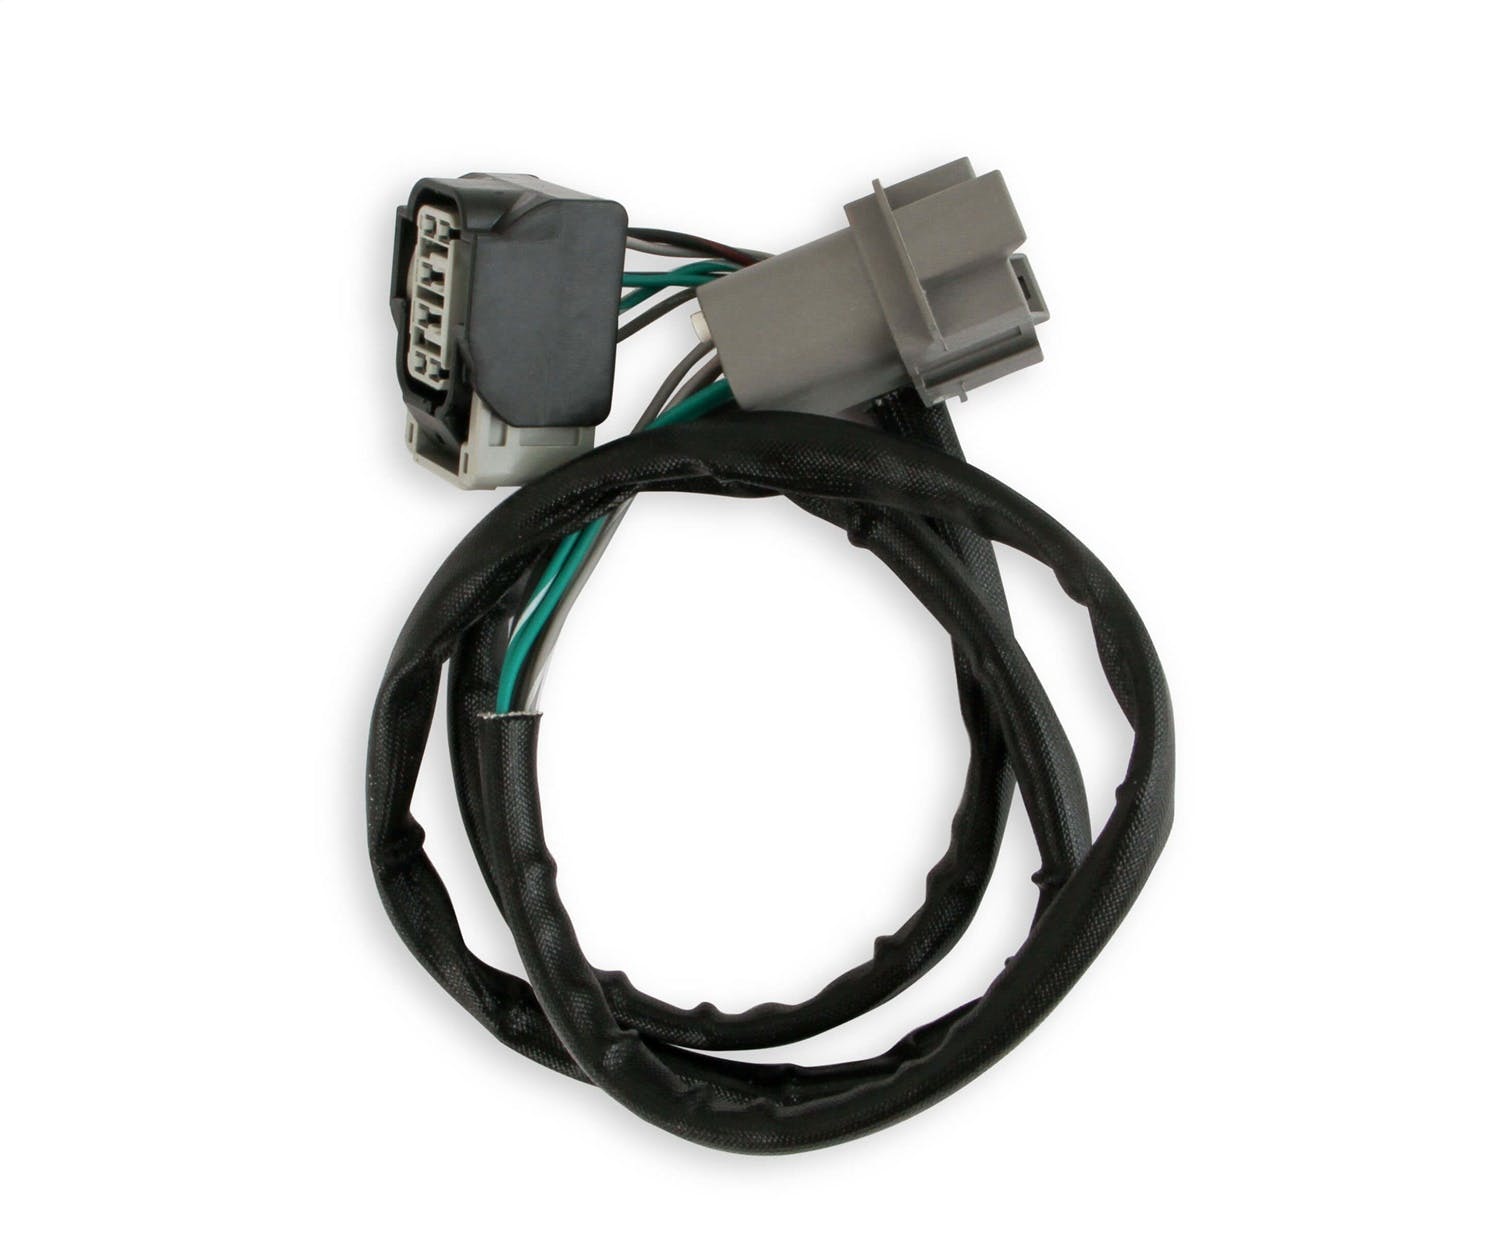 MSD Performance 2274 Sensor 1 Replacement Harness For 7766